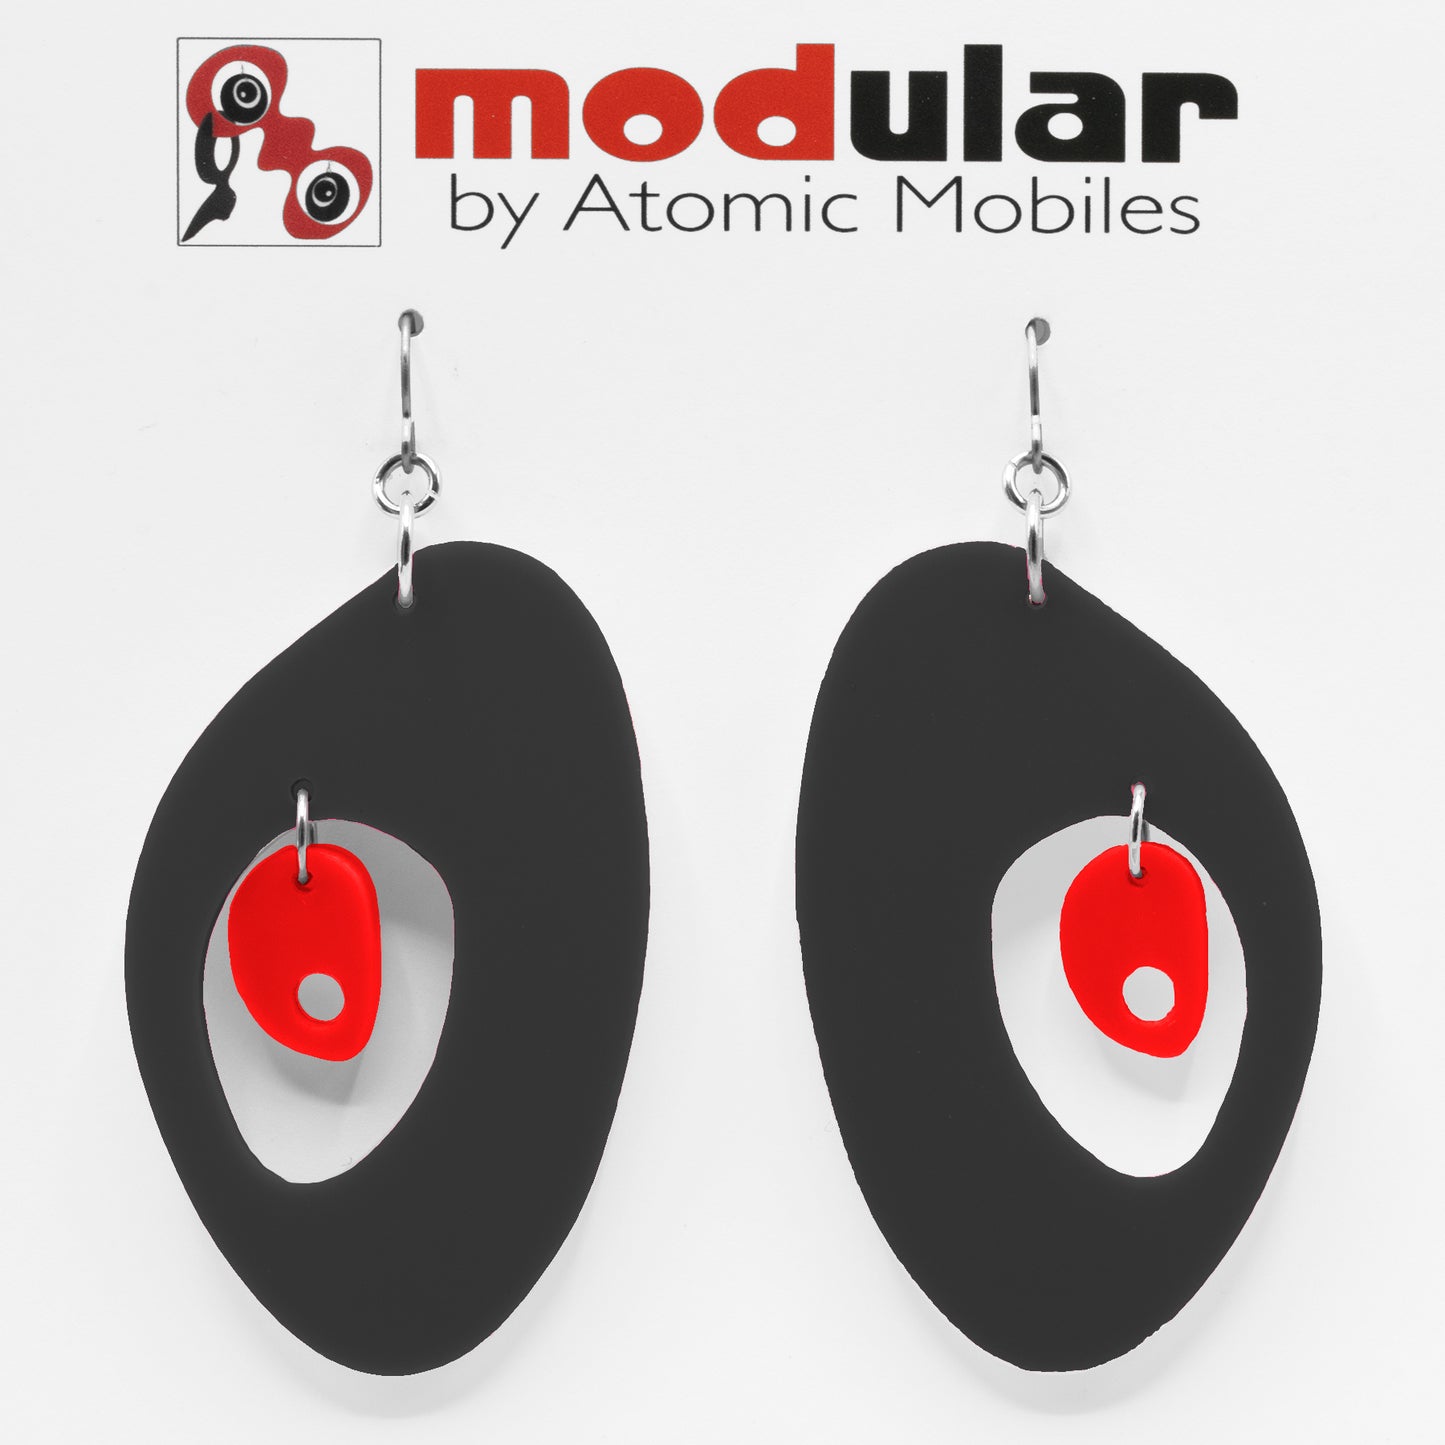 MODular Earrings - The Modernist Statement Earrings in Black and Red by AtomicMobiles.com - retro era inspired mod handmade jewelry